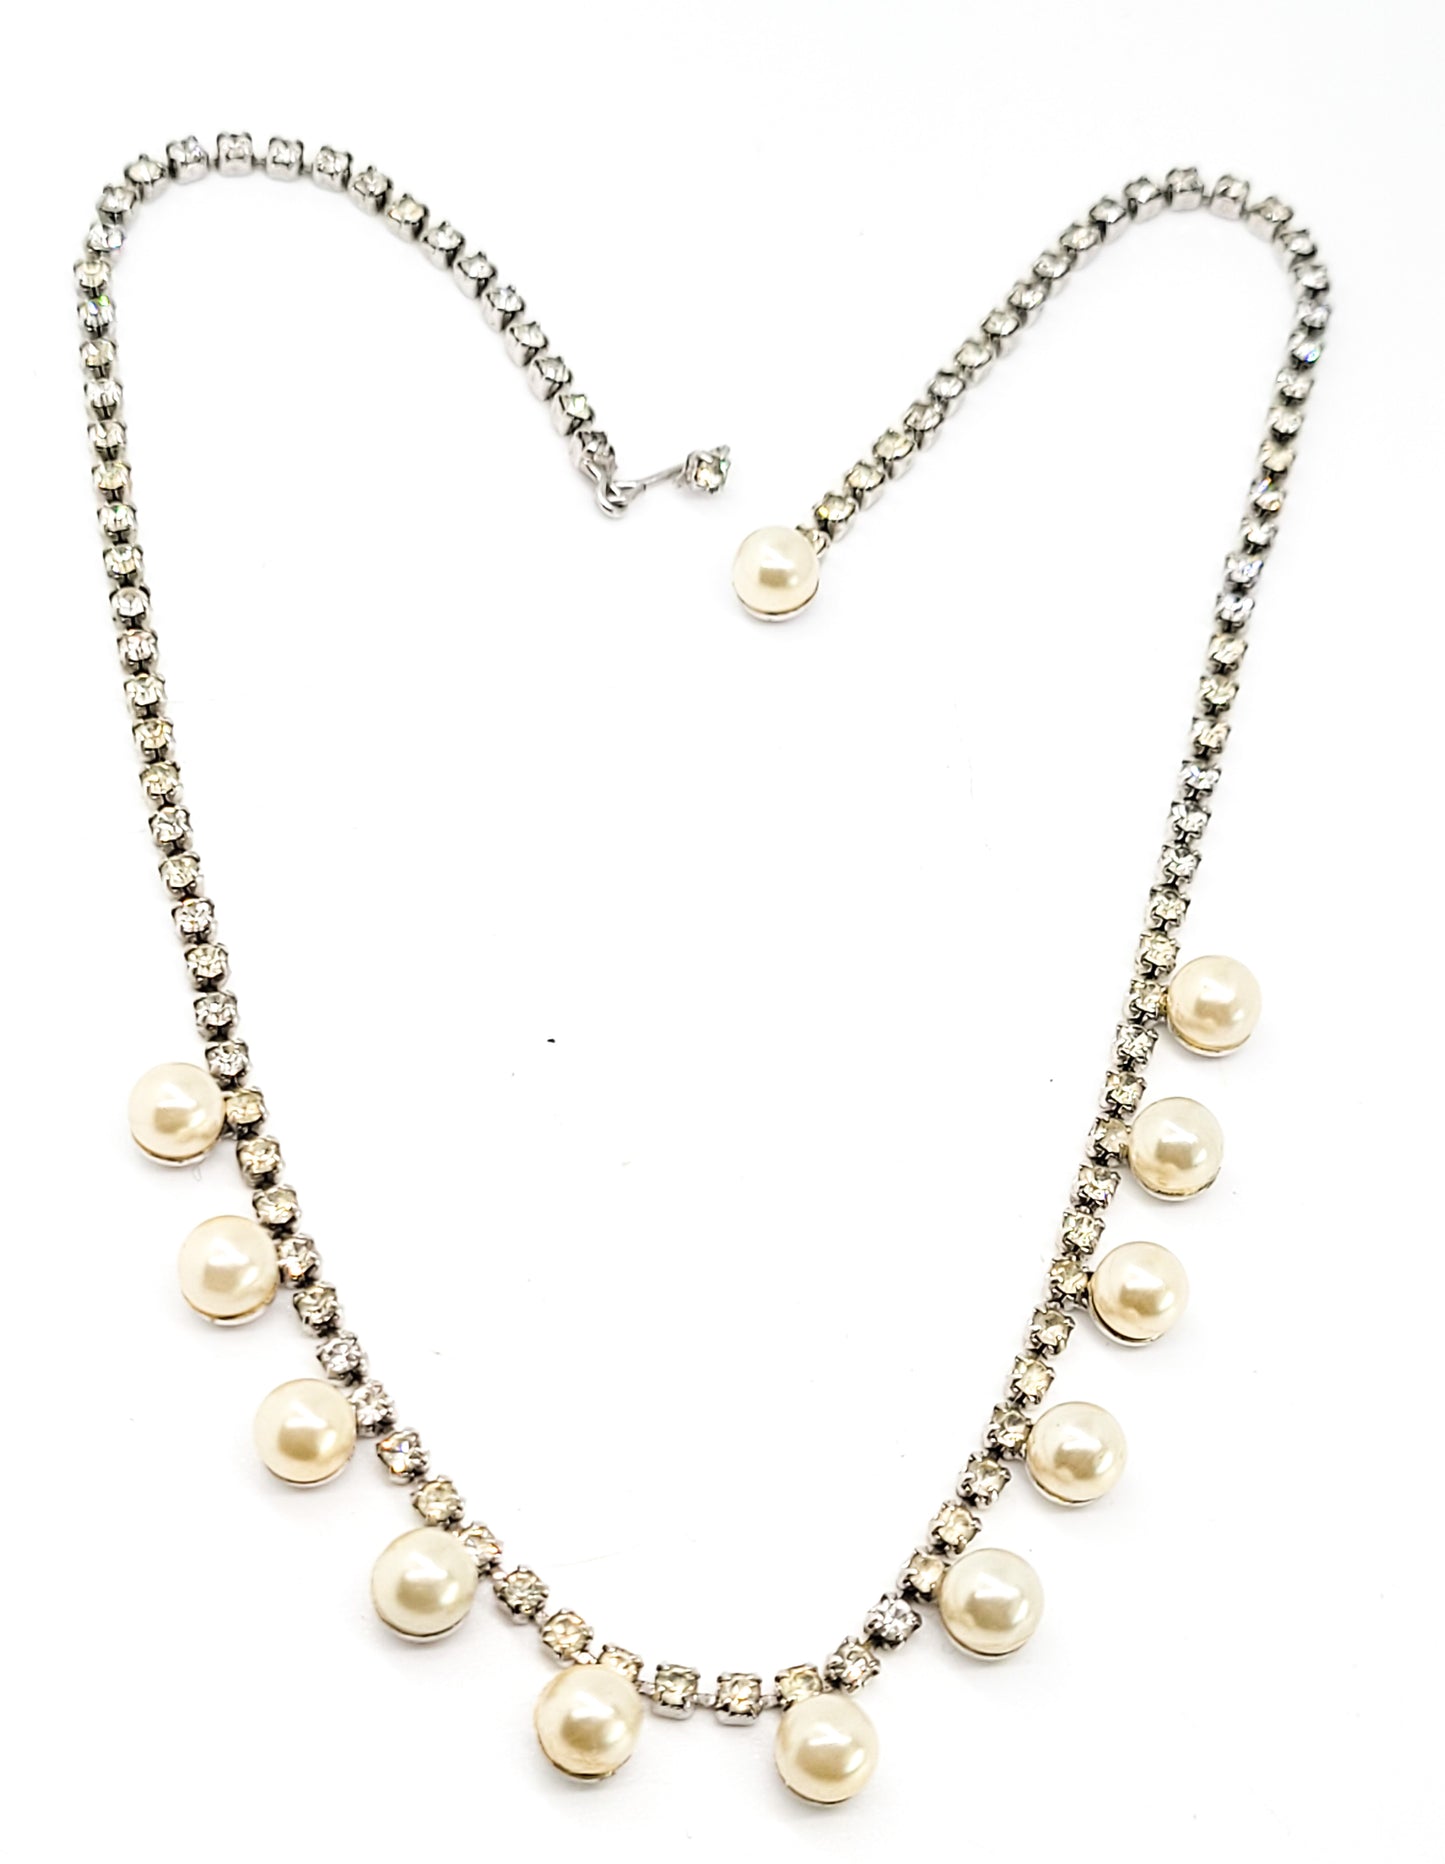 Rhinestone and white faux pearl vintage clear rhinestone statement necklace